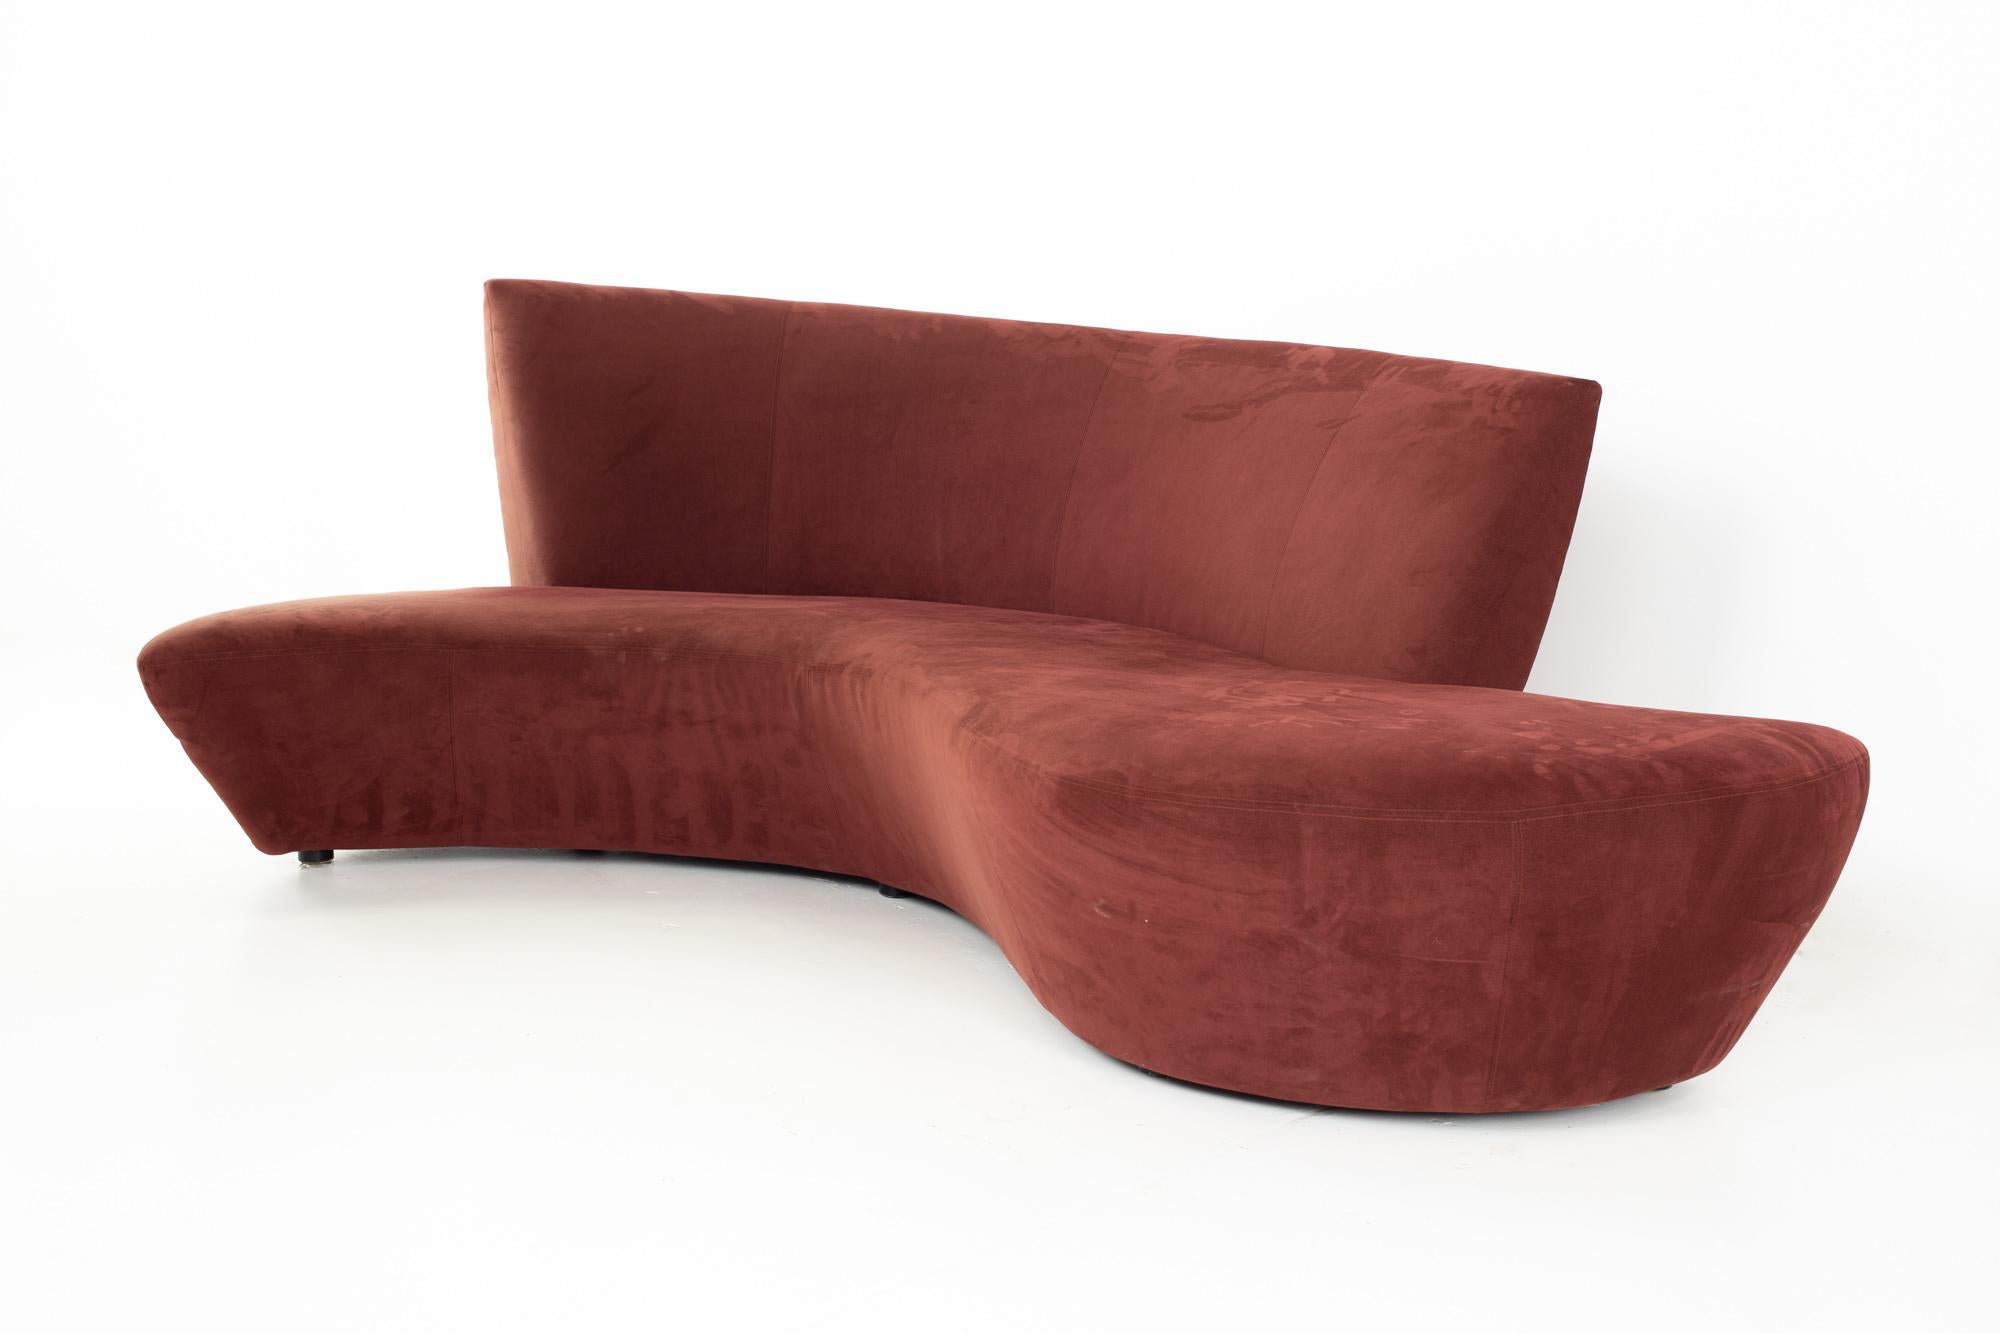 Vladimir Kagan Mid Century Maroon Bilbao sofa
Sofa measures: 97 wide x 62.5 deep x 37 high, with a seat height of 15.25 inches

All pieces of furniture can be had in what we call restored vintage condition. That means the piece is restored upon